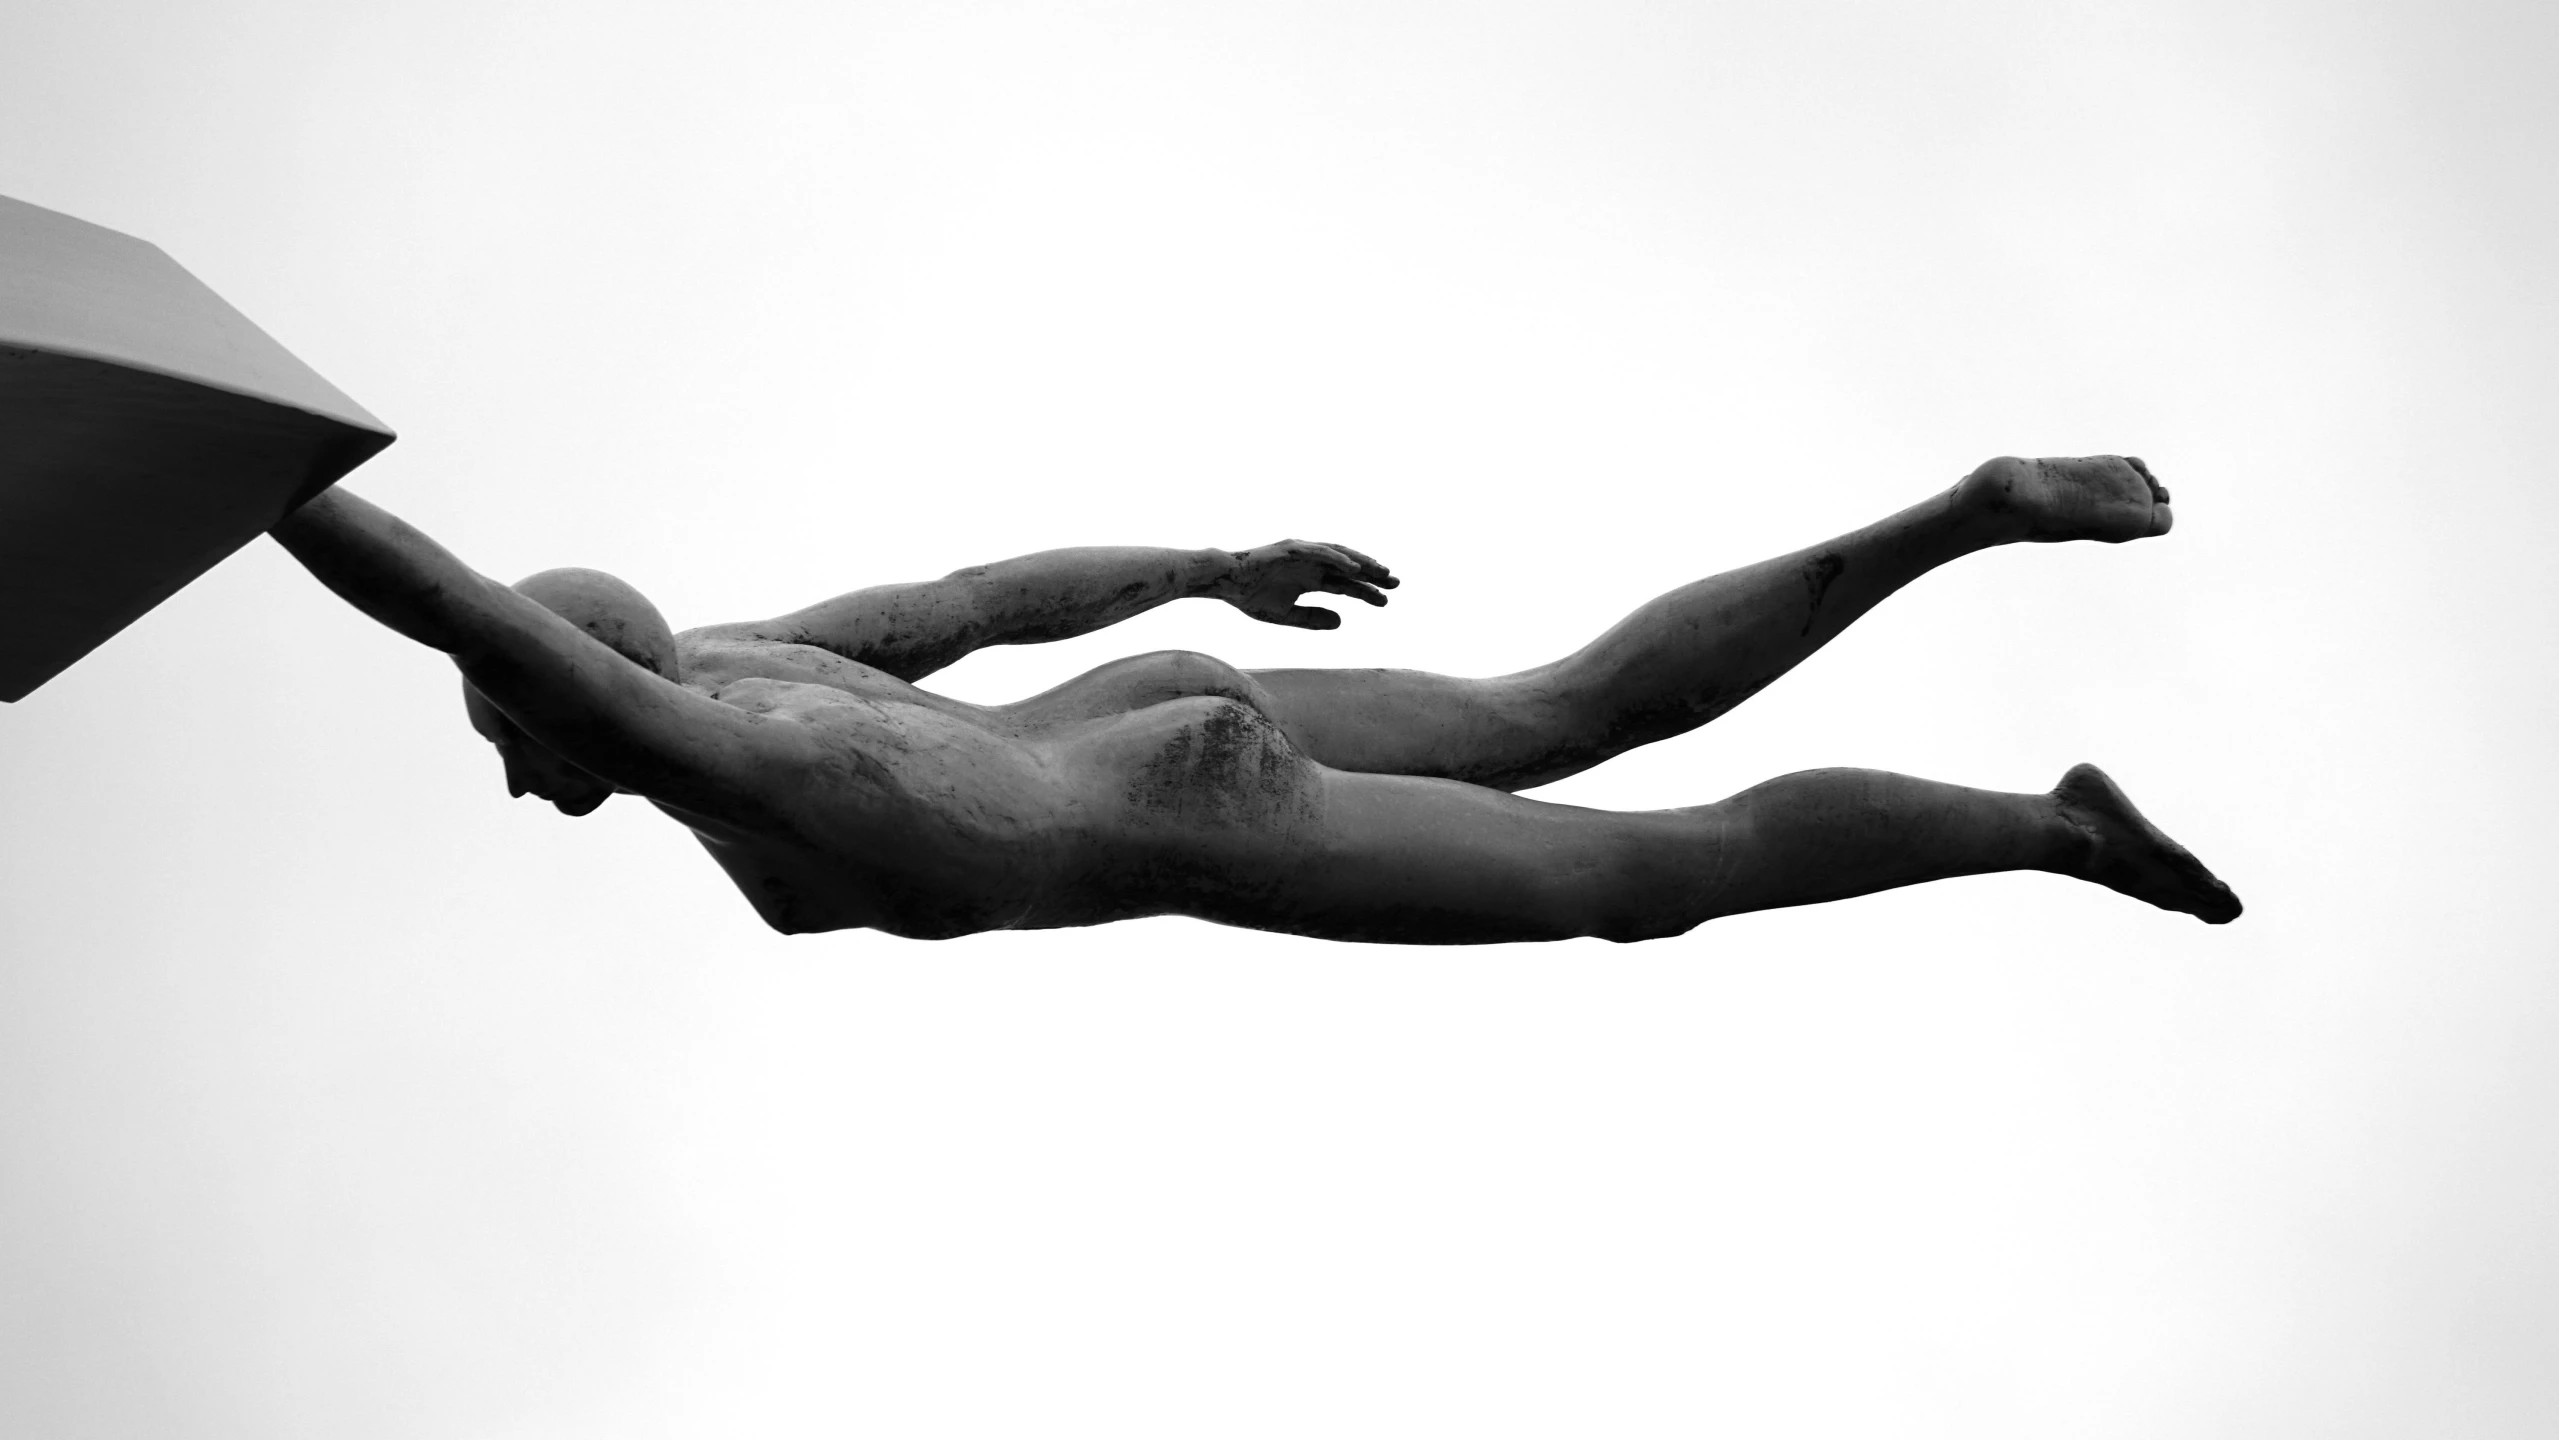 a statue of a man holding an umbrella, a statue, inspired by Herb Ritts, pexels contest winner, figurative art, olympic diving springoard, flying whale, abstract human body, lying on an abstract